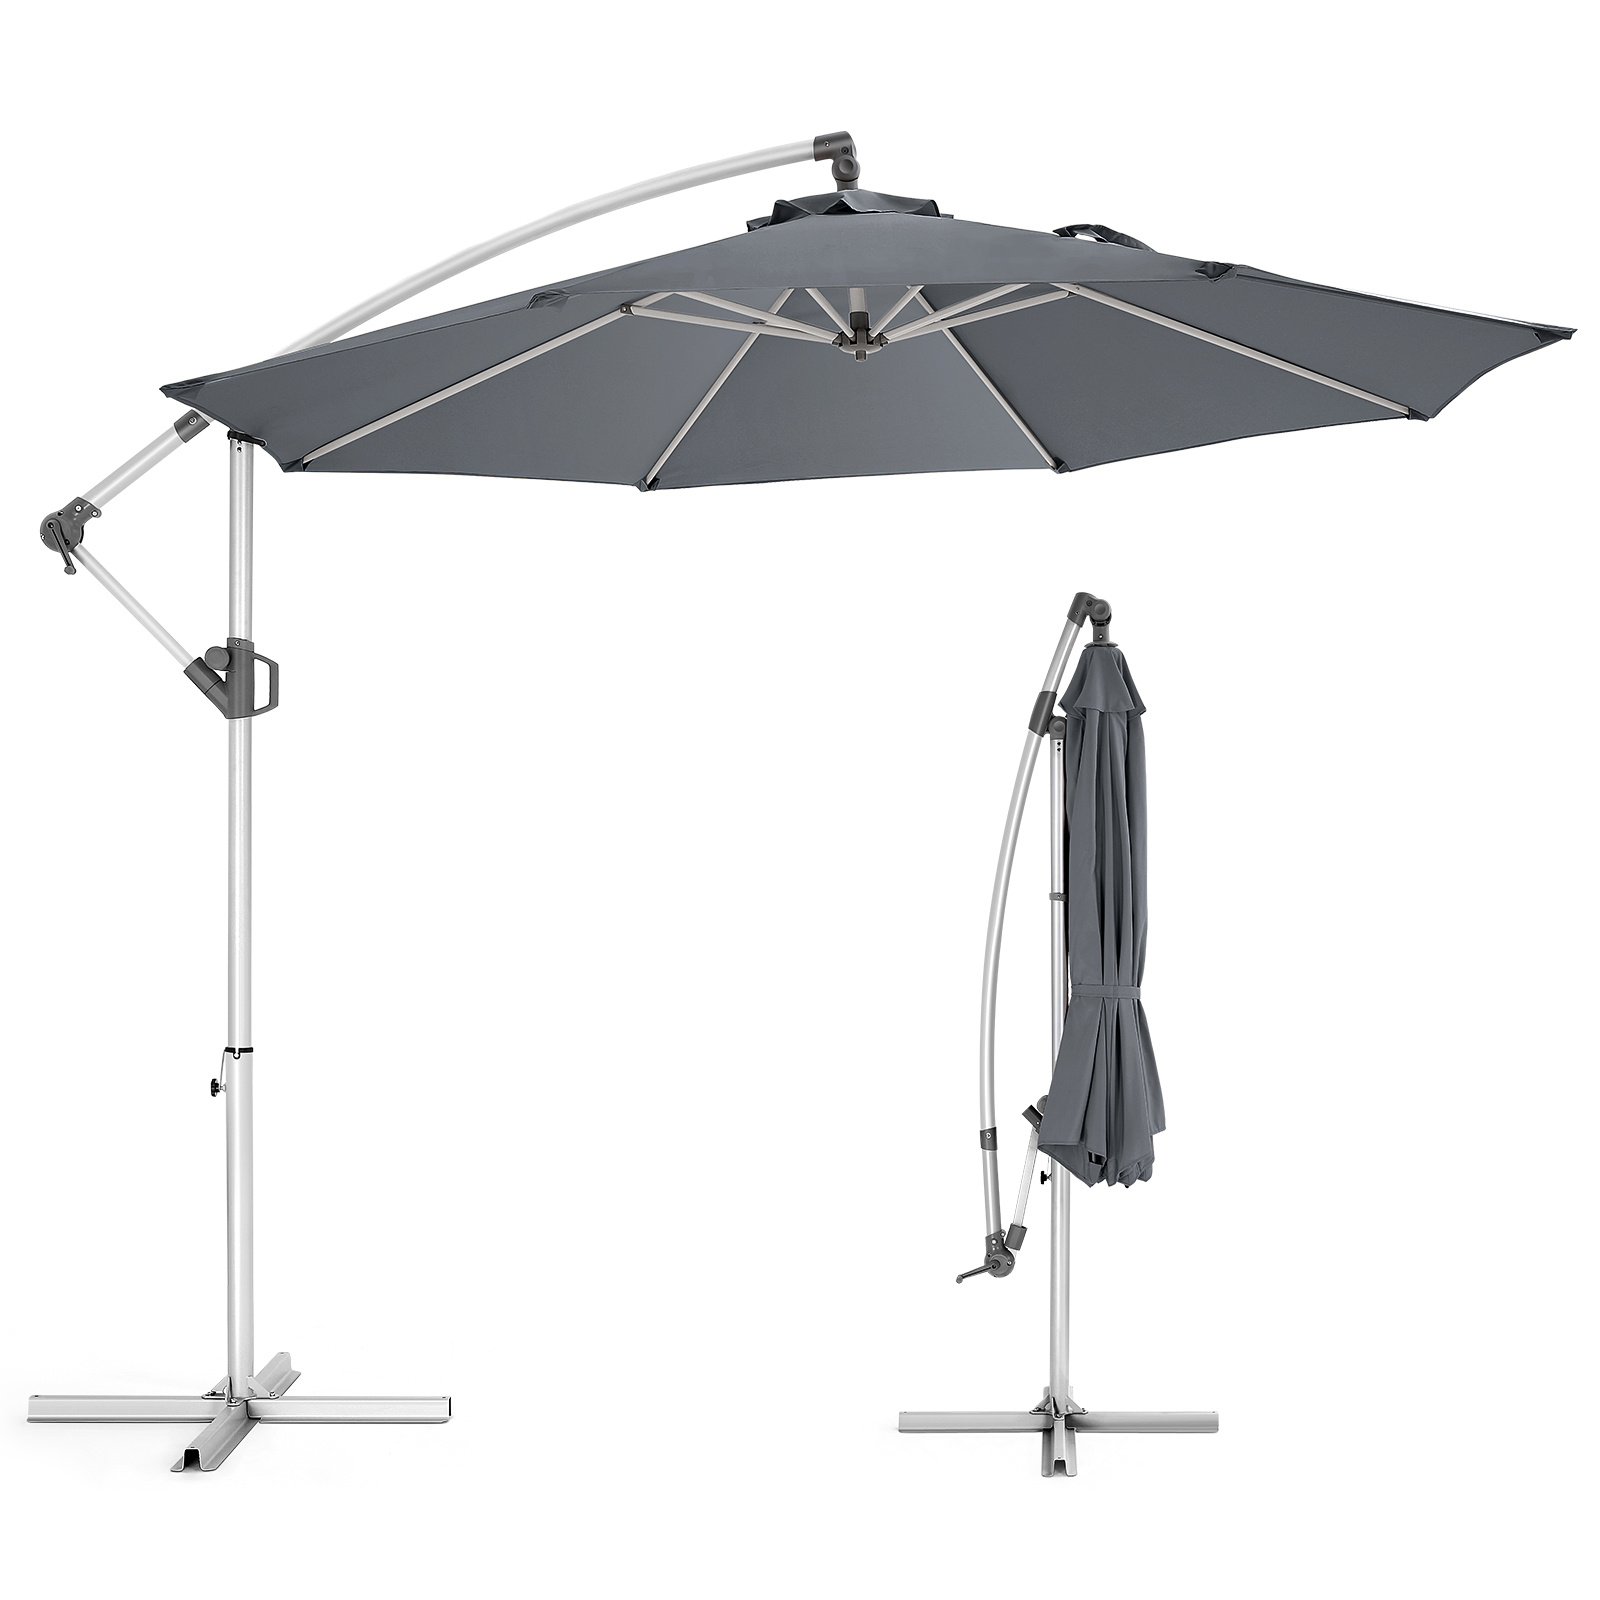 

10ft Offset Patio Umbrella - Cantilever Patio Umbrellas, 5-year Fade Resistant Upf50 Uv Protection With Easy Tilt Adjustment And Crank